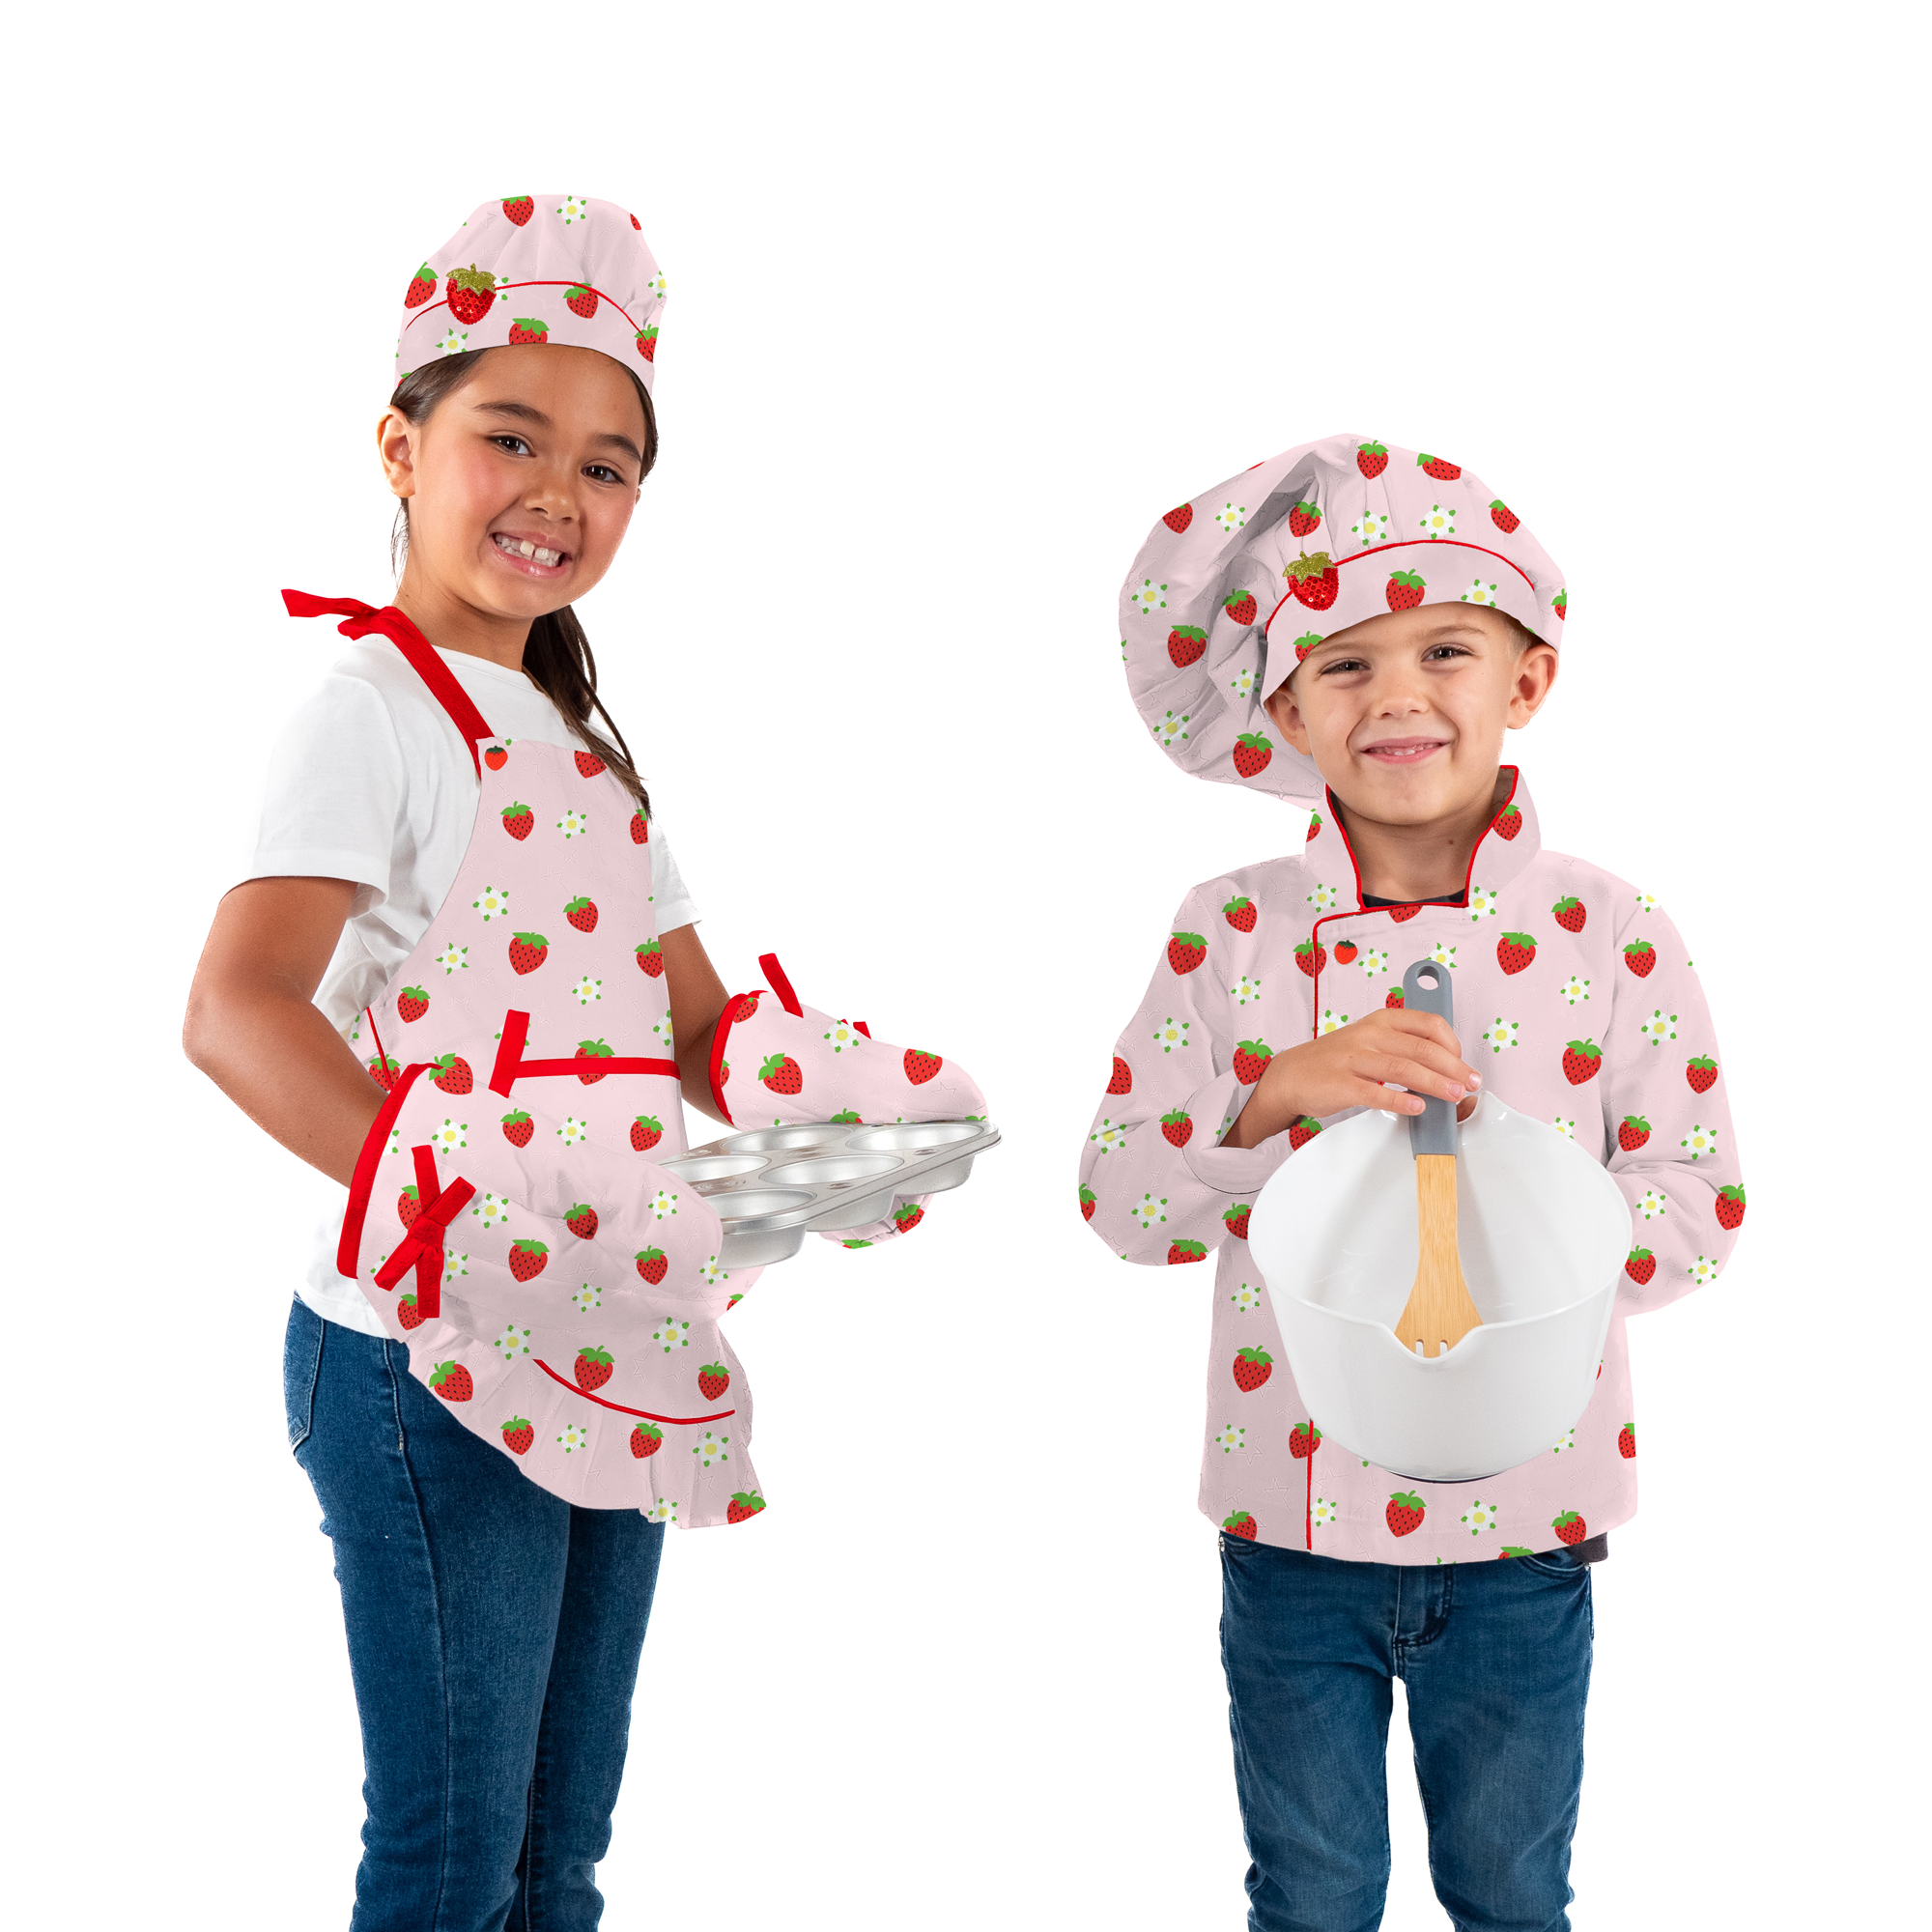 Deluxe Chef Set for Kids: Complete Cooking Costume & Kit